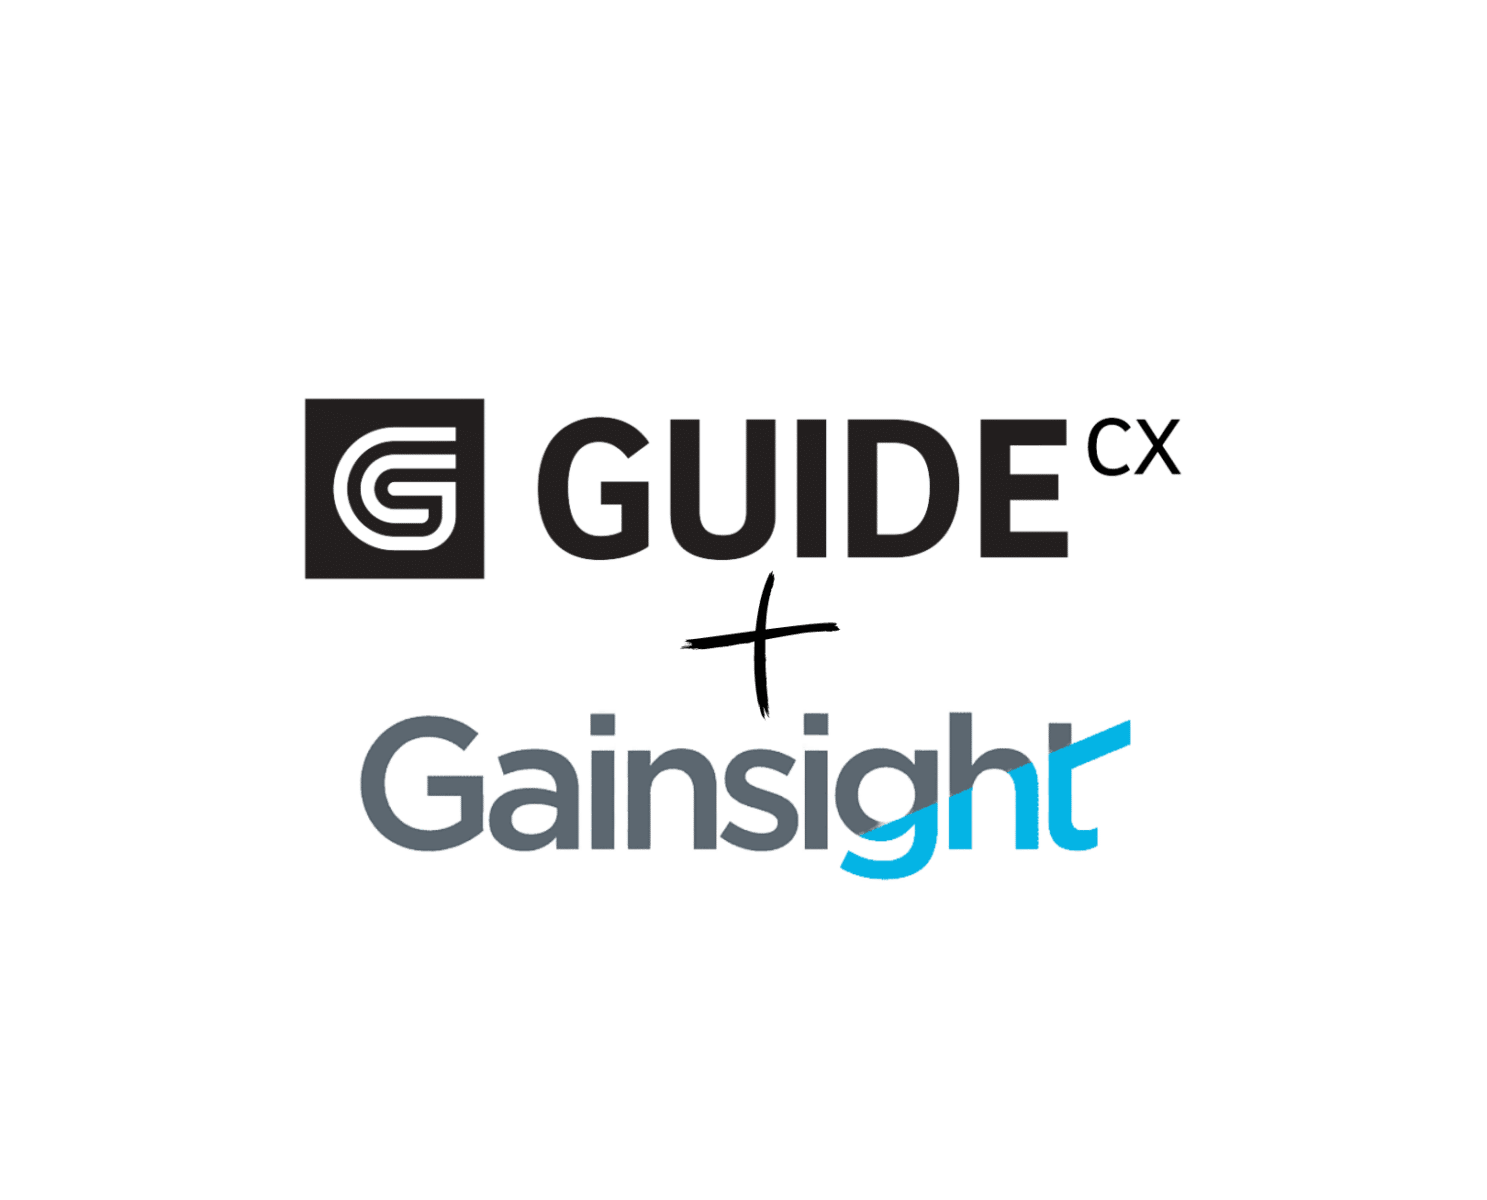 GUIDEcx and Gainsight logos